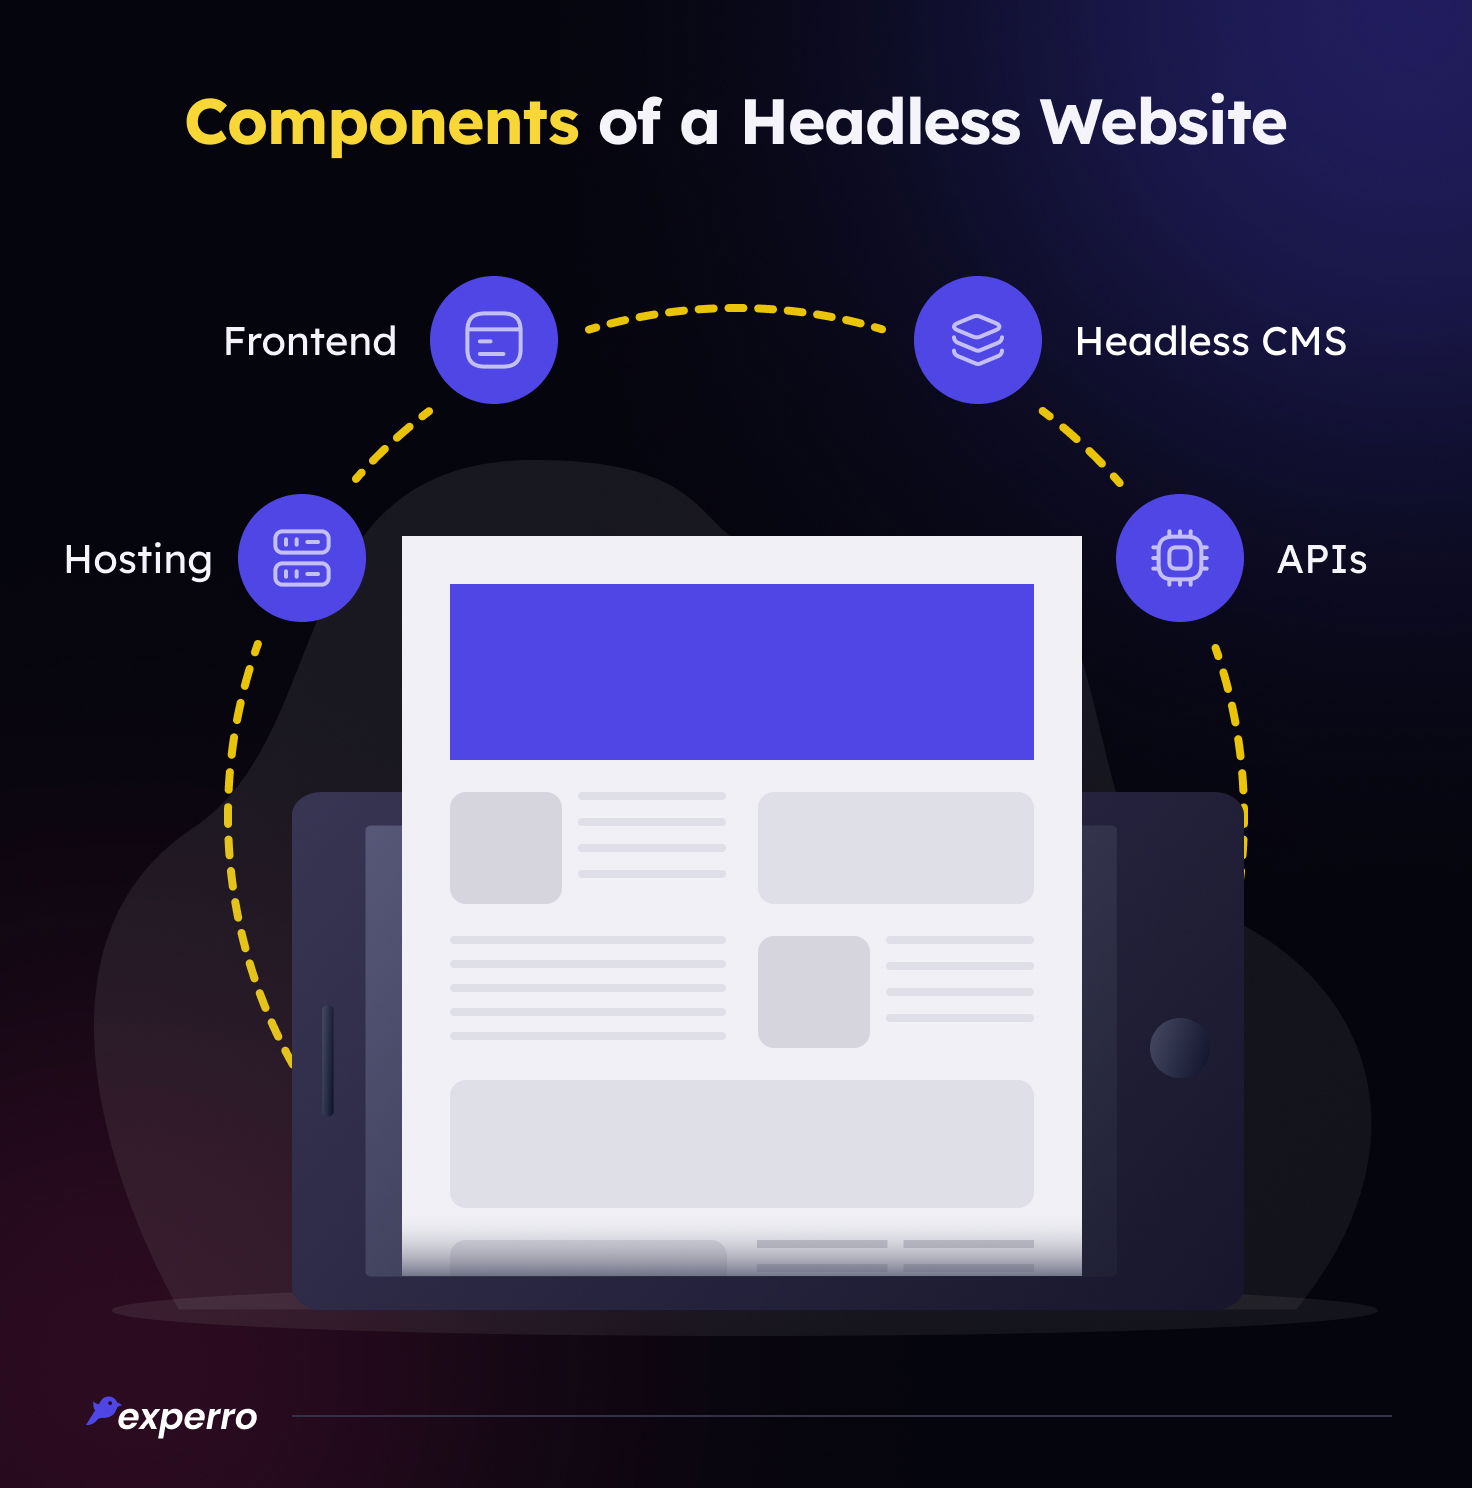 Components of Headless Website